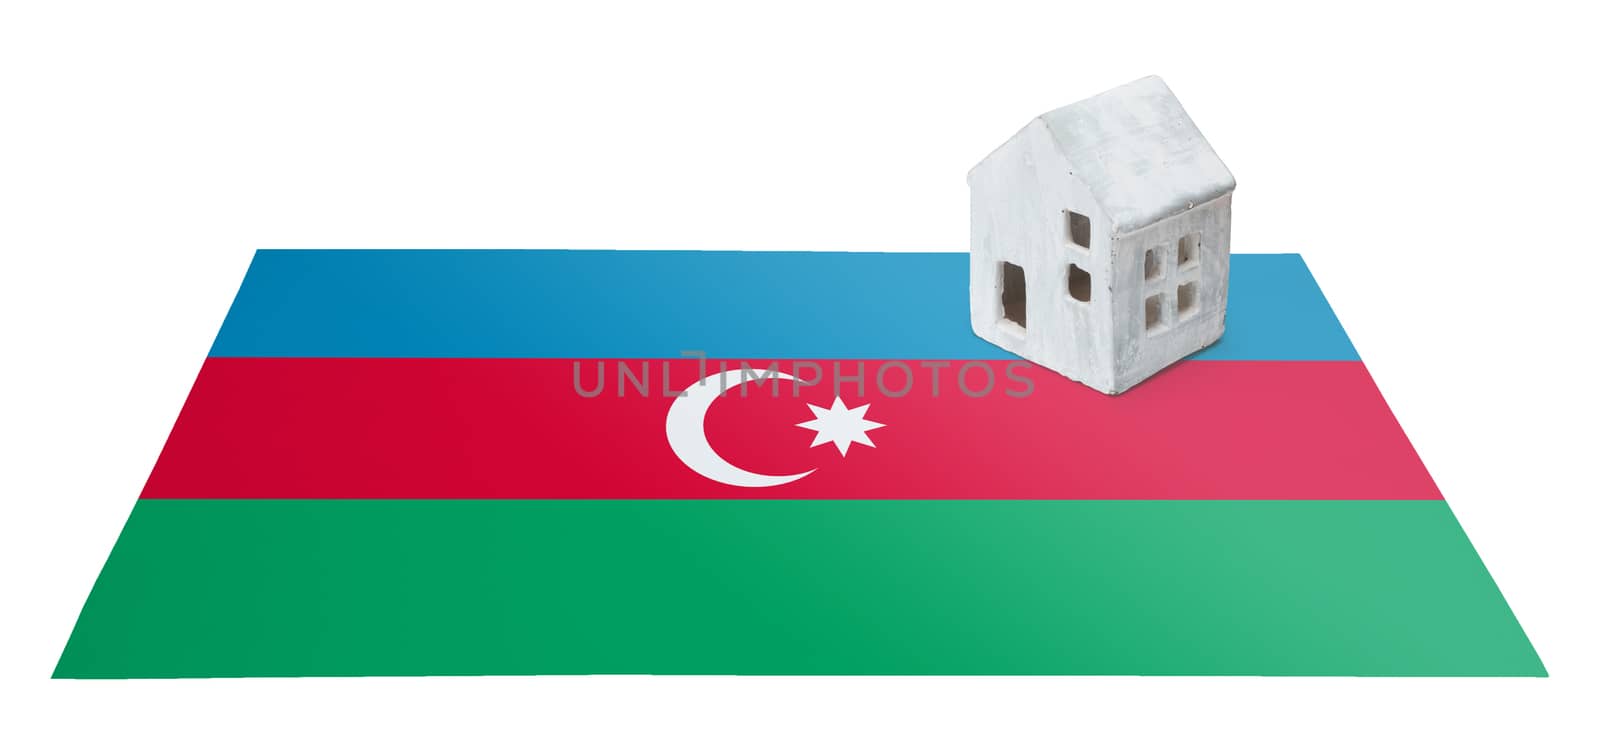 Small house on a flag - Azerbaijan by michaklootwijk